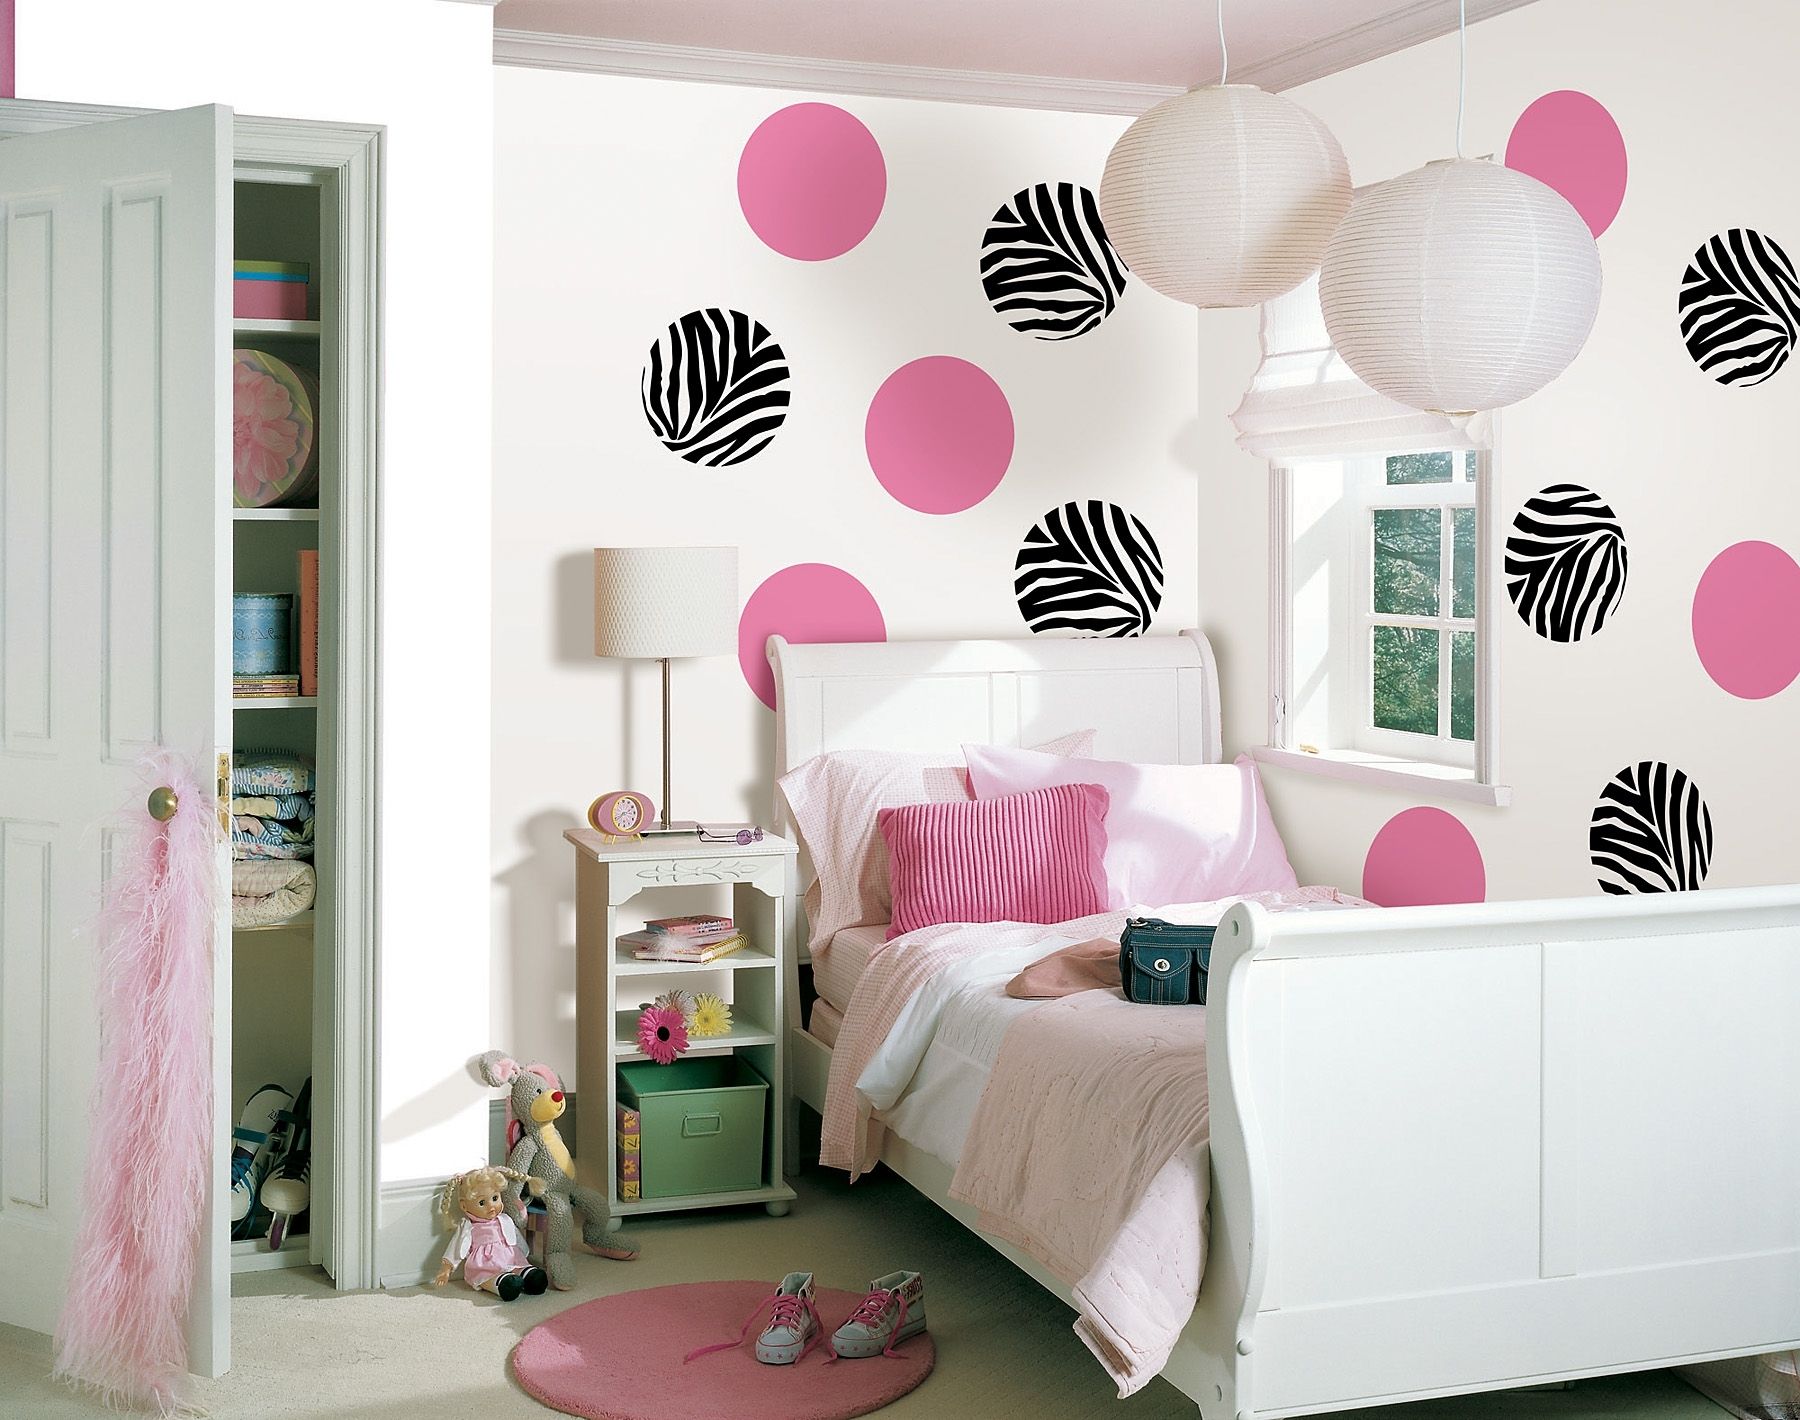 Big Wall Art Teen Girl Bedroom Decorating Ideas Ideas For Teen Pertaining To Most Recently Released Wall Art For Teenage Girl Bedrooms (View 13 of 15)